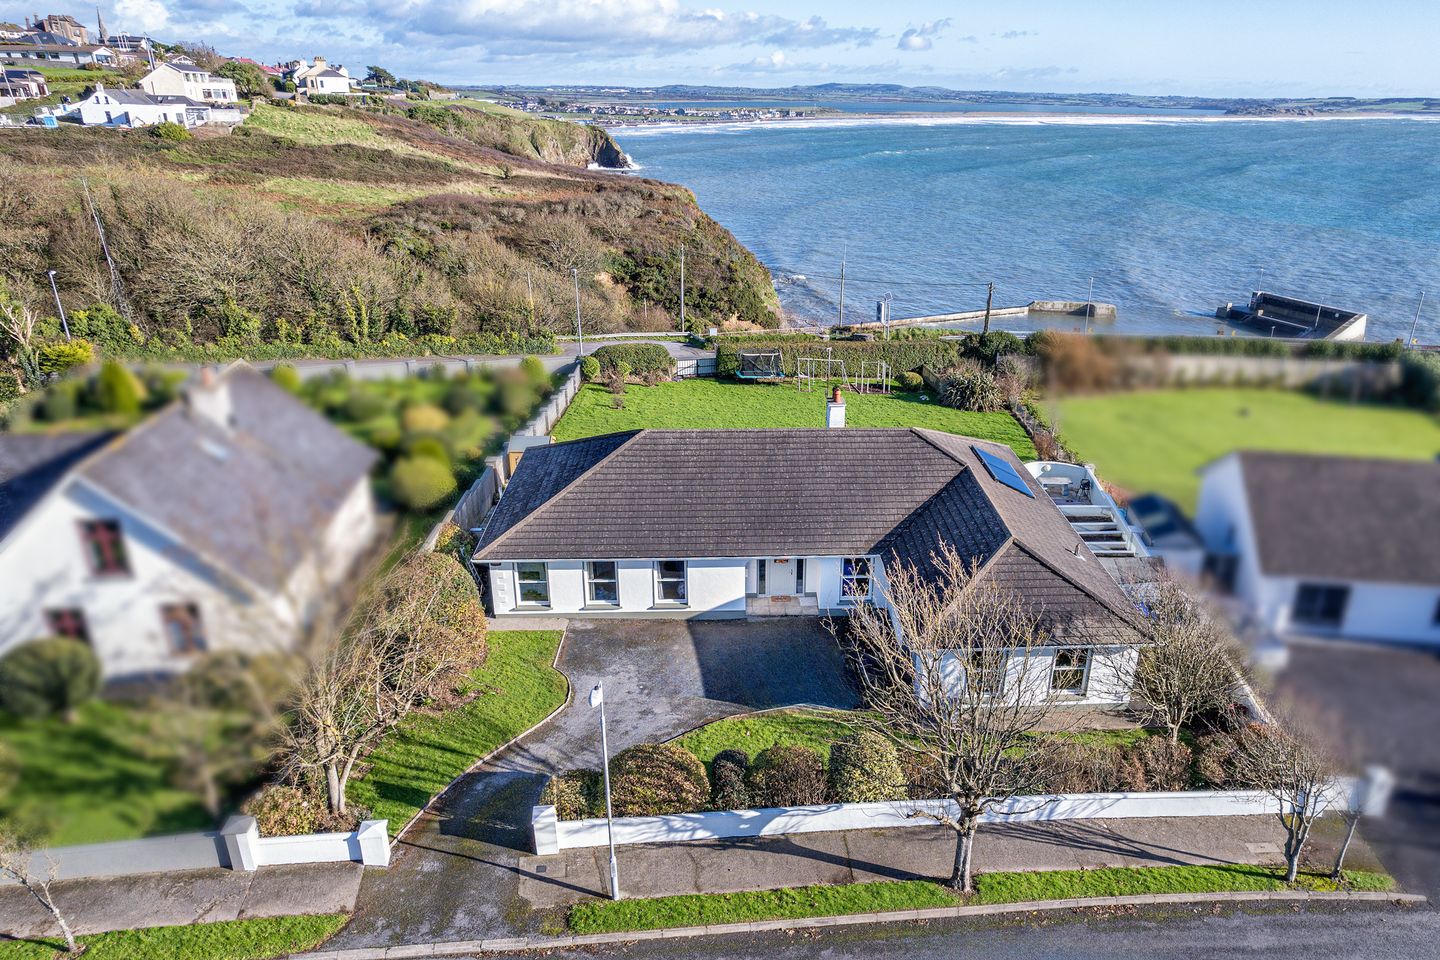 Cluain Ard, 5 Cliff Road, Tramore, Co. Waterford, X91X7P4